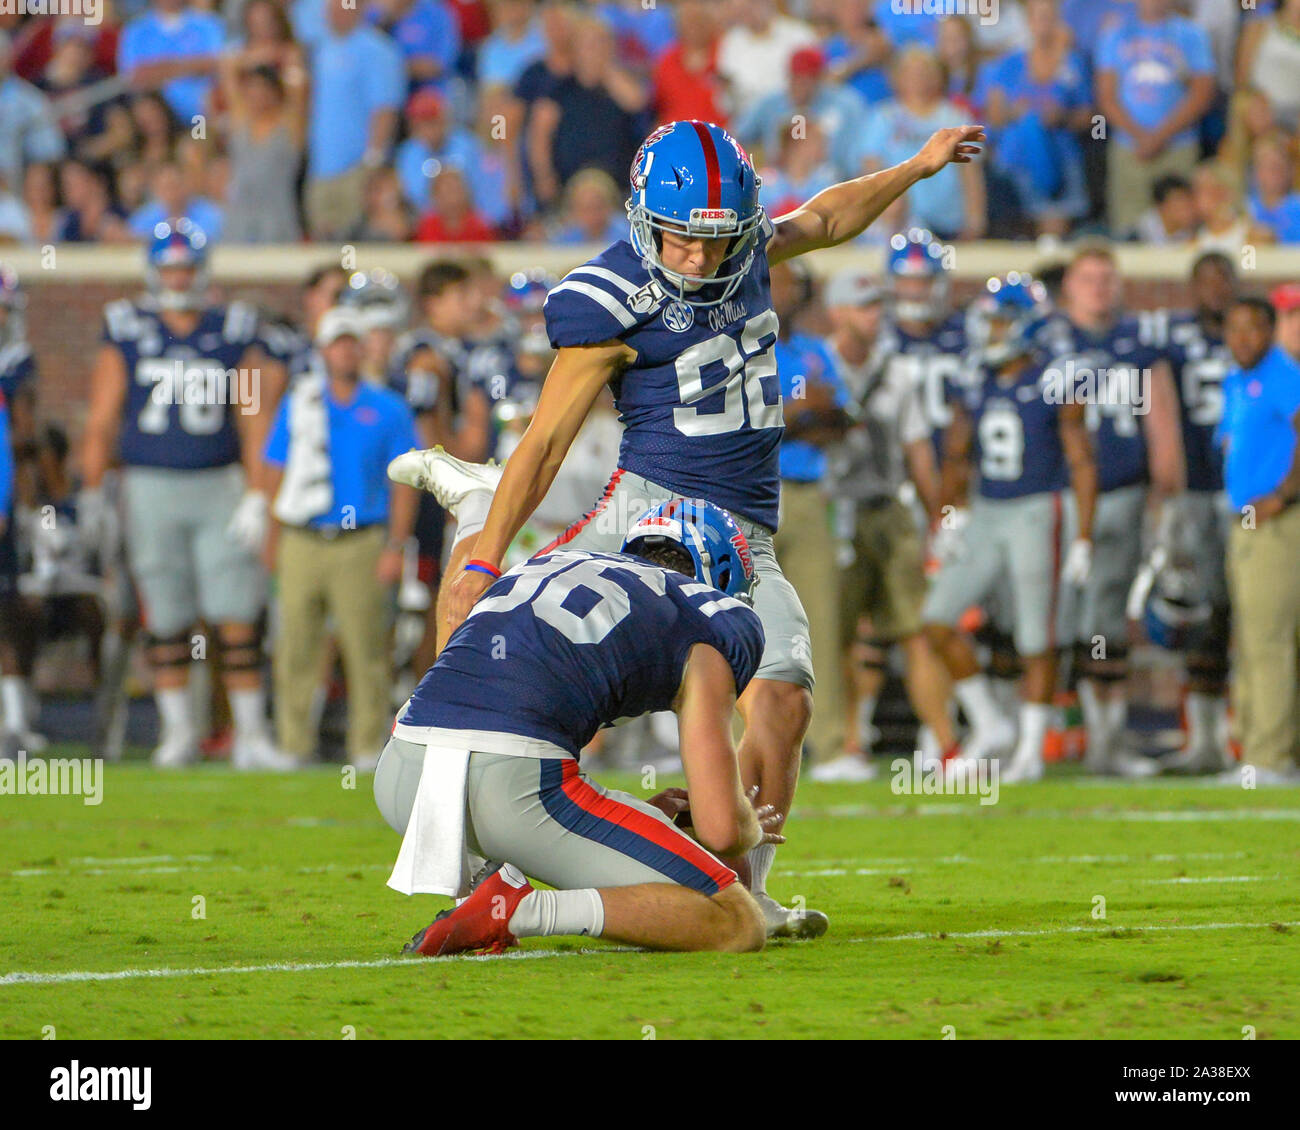 Oxford, MS, USA. 05th Oct, 2019. Ole' Miss kicker, Luke Logan (92), prepares to kick a filed goal during the NCAA football game between the Vanderbilt Commodores and the Ole' Miss Rebels at Vaught Hemingway Stadium in Oxford, MS. Credit: Kevin Langley/Sports South Media/CSM/Alamy Live News Stock Photo